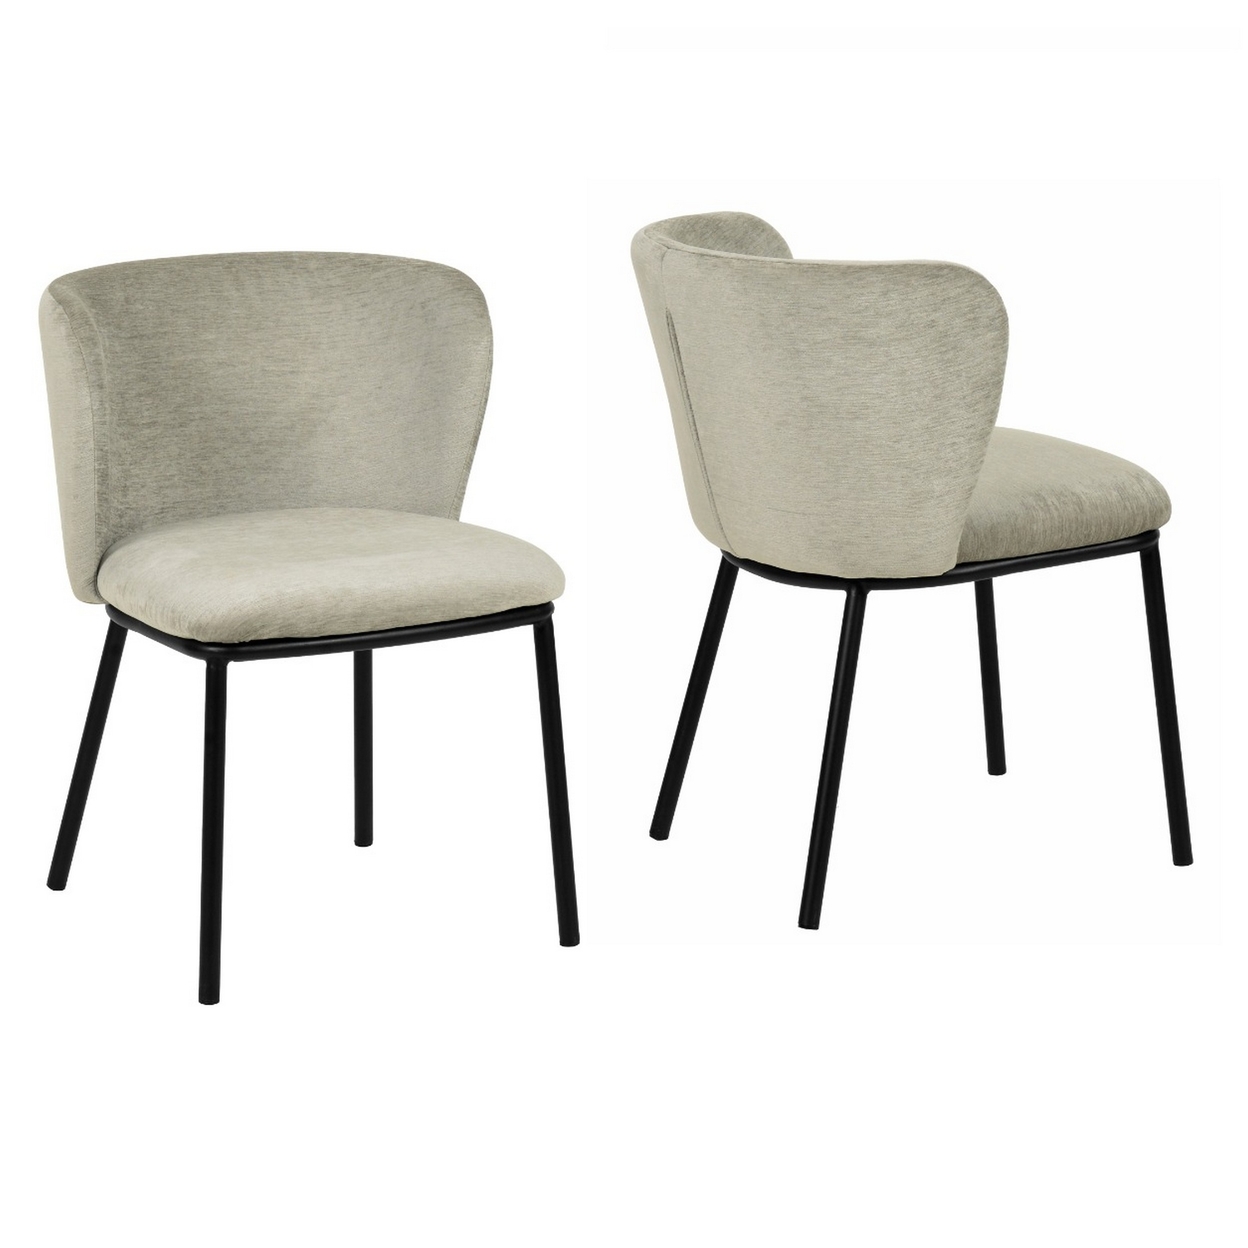 Cid Tre 21 Inch Dining Chair, Set Of 2, Polyester Fabric, Smooth Gray - Saltoro Sherpi